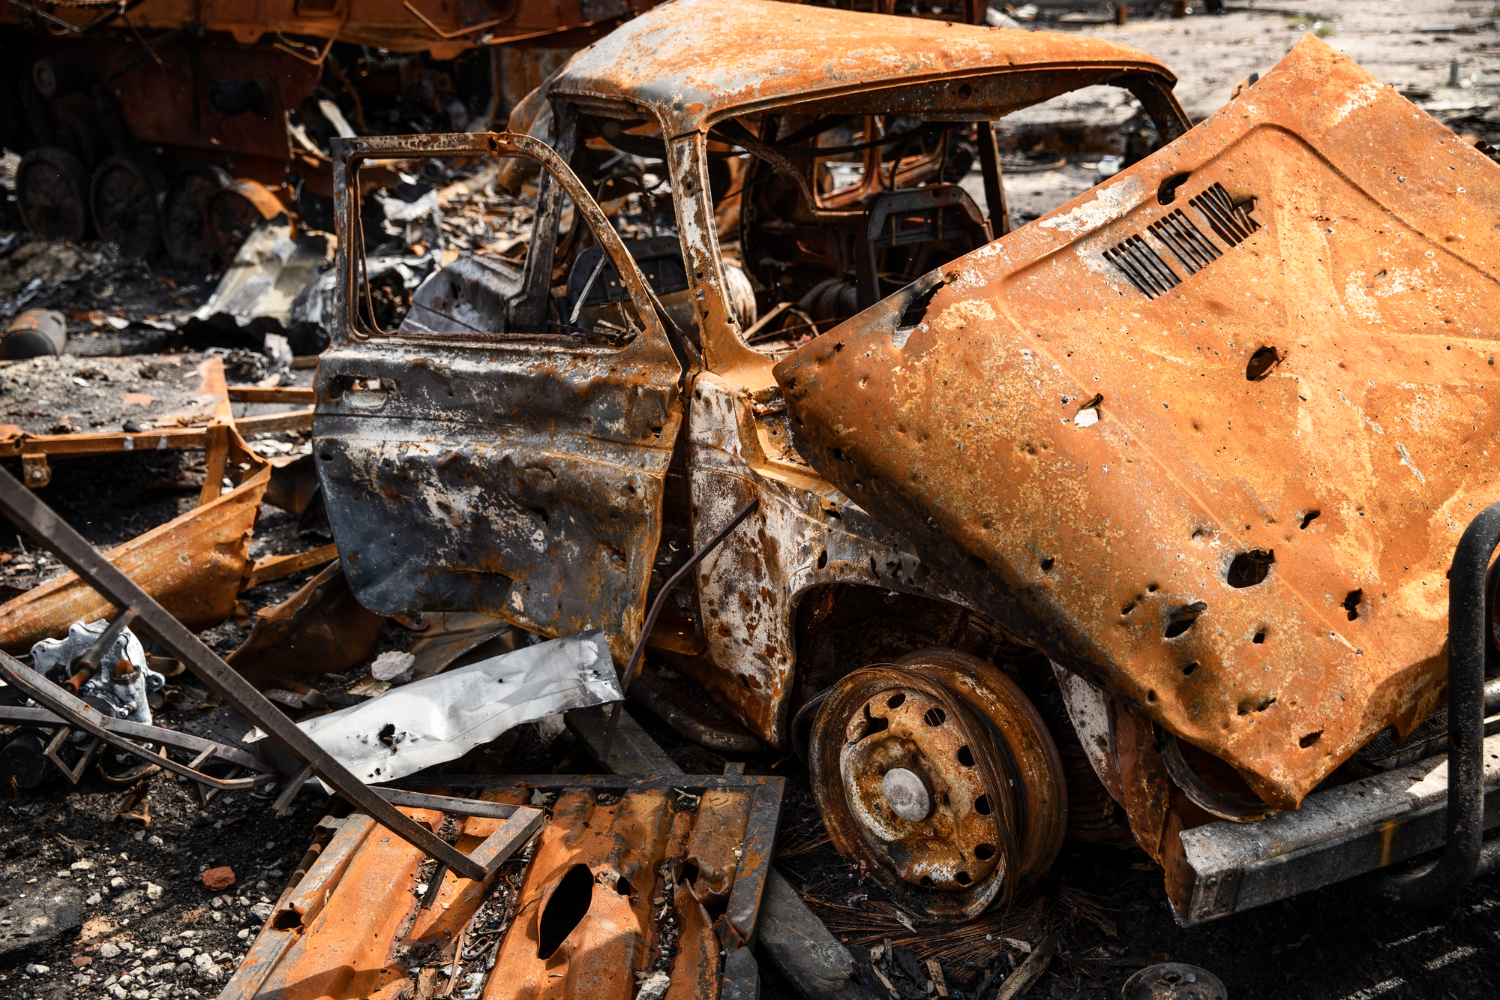 How Can You Get Rid of Your Old Car With Junk Car Removal Services?